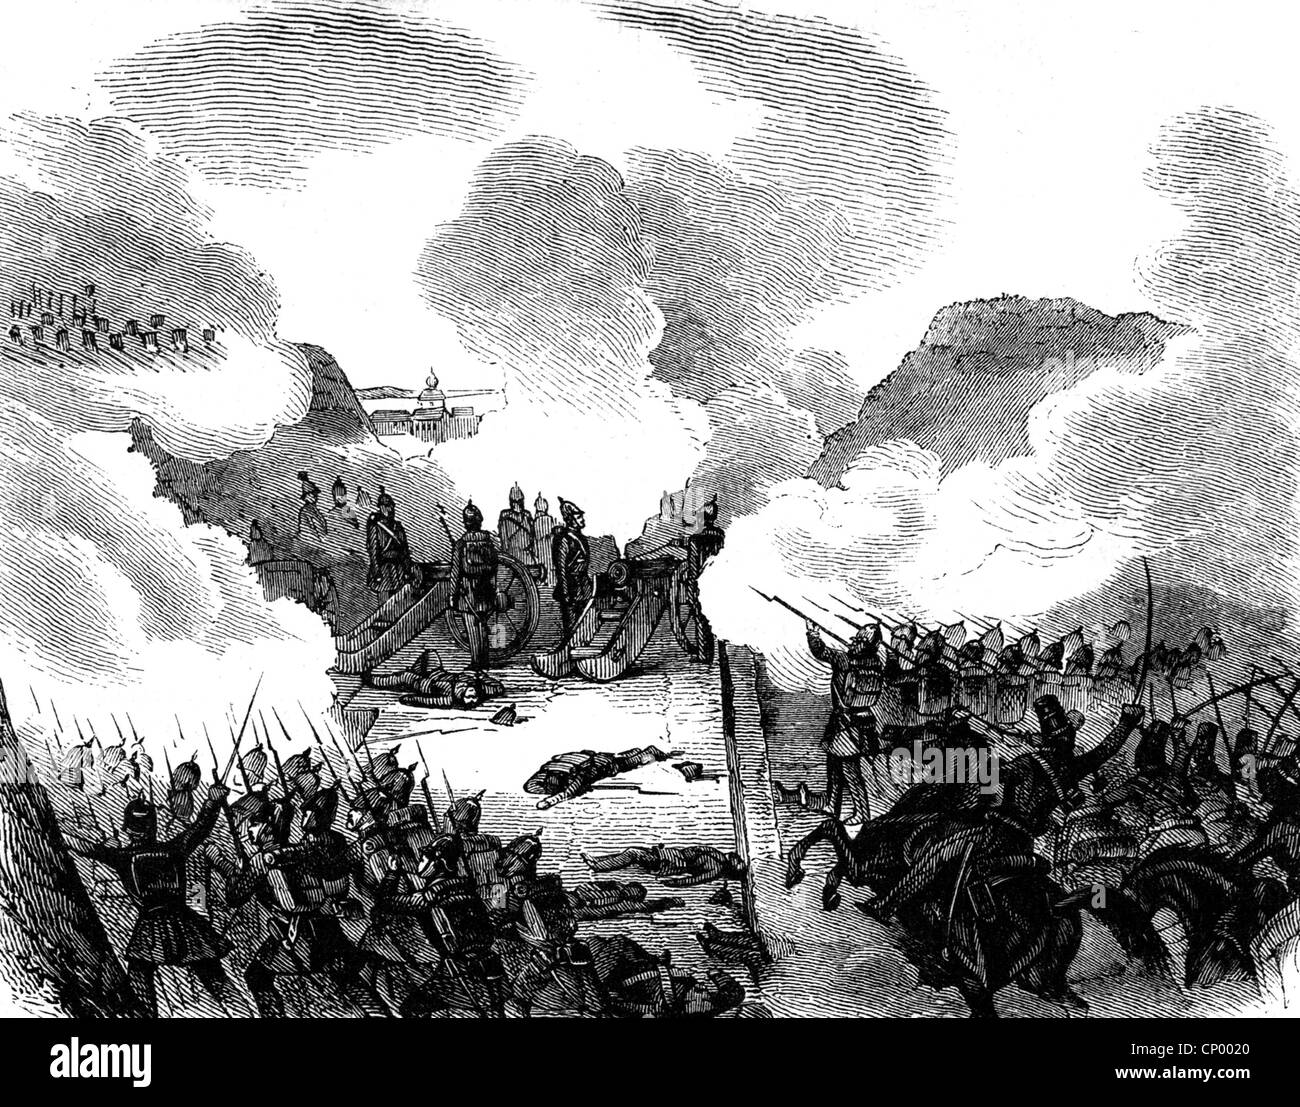 First Schleswig War, 1848 - 1851, Prussian troops charge Danevirke, 23.4.1848, contemporary wood engraving, General Friedrich Graf Wrangel, Denmark, Dannevirke, battles, fights, fortifications, fortification, Germany, Schleswig-Holstein Question, Holstein, intervention, interventions, military, battle, battling, fight, fighting, assaults, assault, attack, attacking, charge, charging, historic, historical, 19th century, people, Additional-Rights-Clearences-Not Available Stock Photo